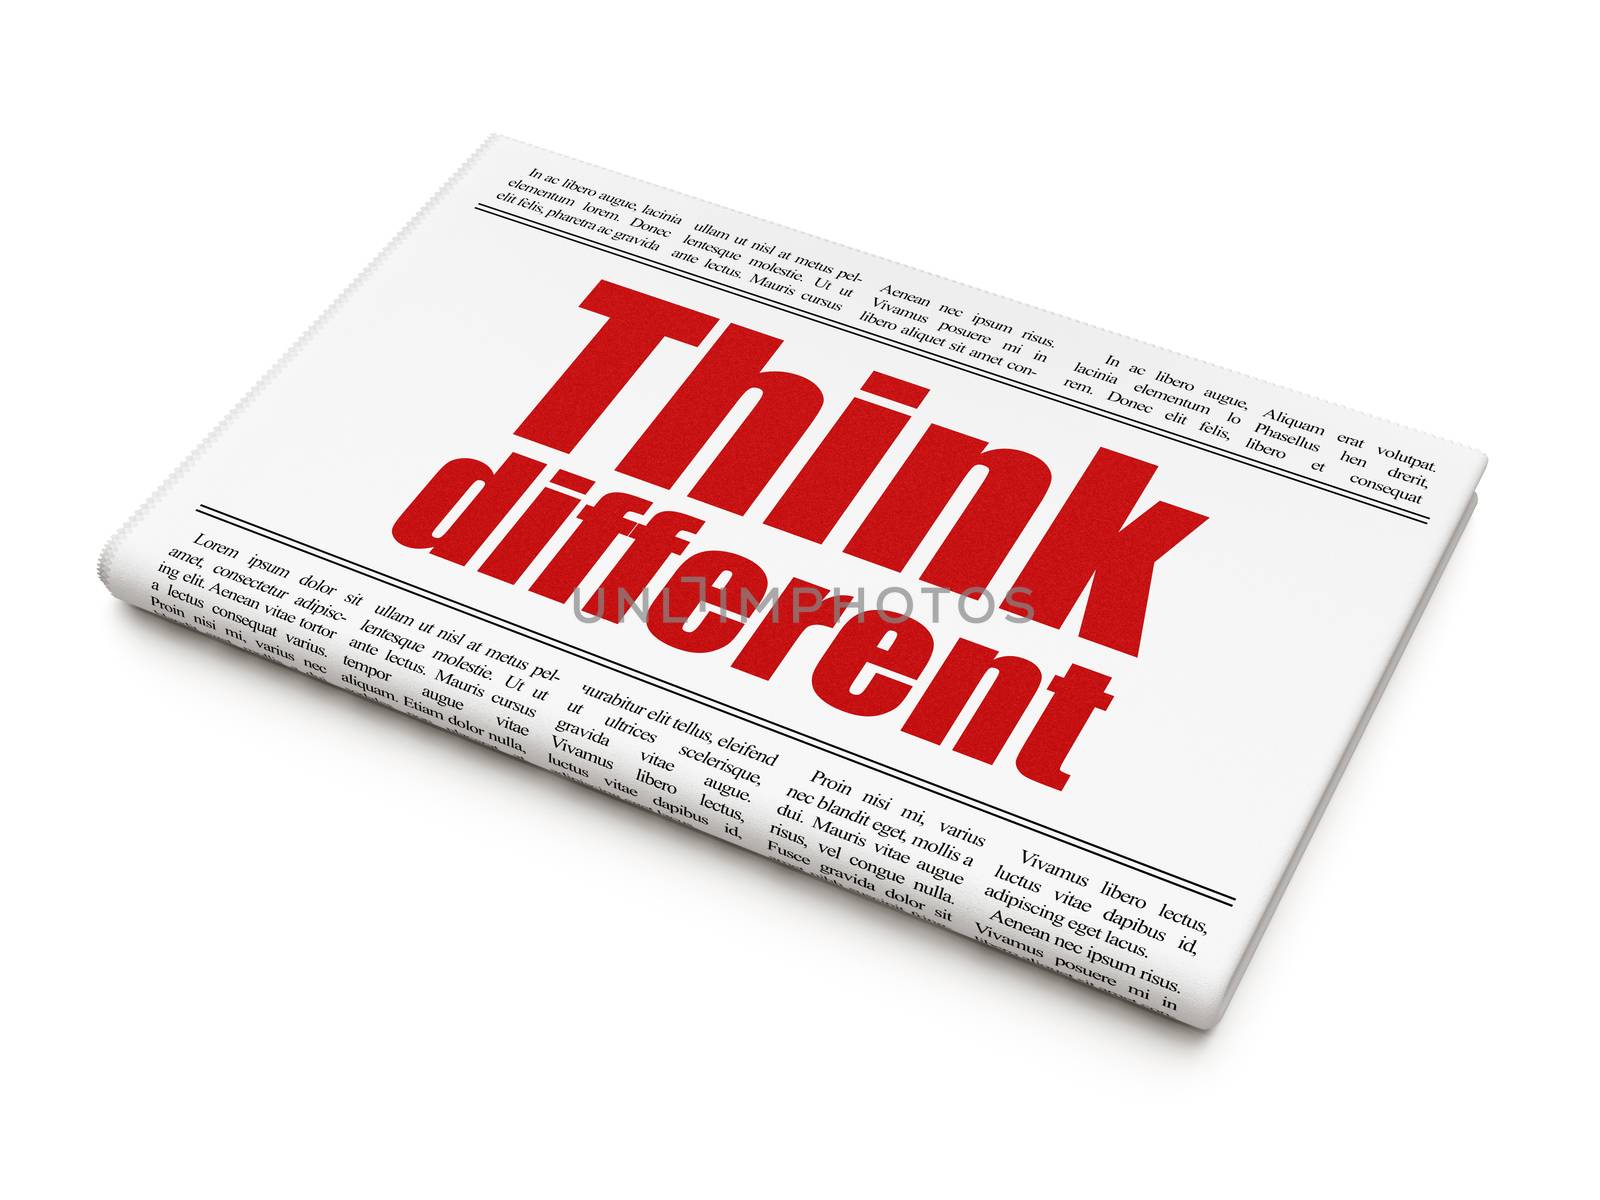 Education concept: newspaper headline Think Different on White background, 3D rendering